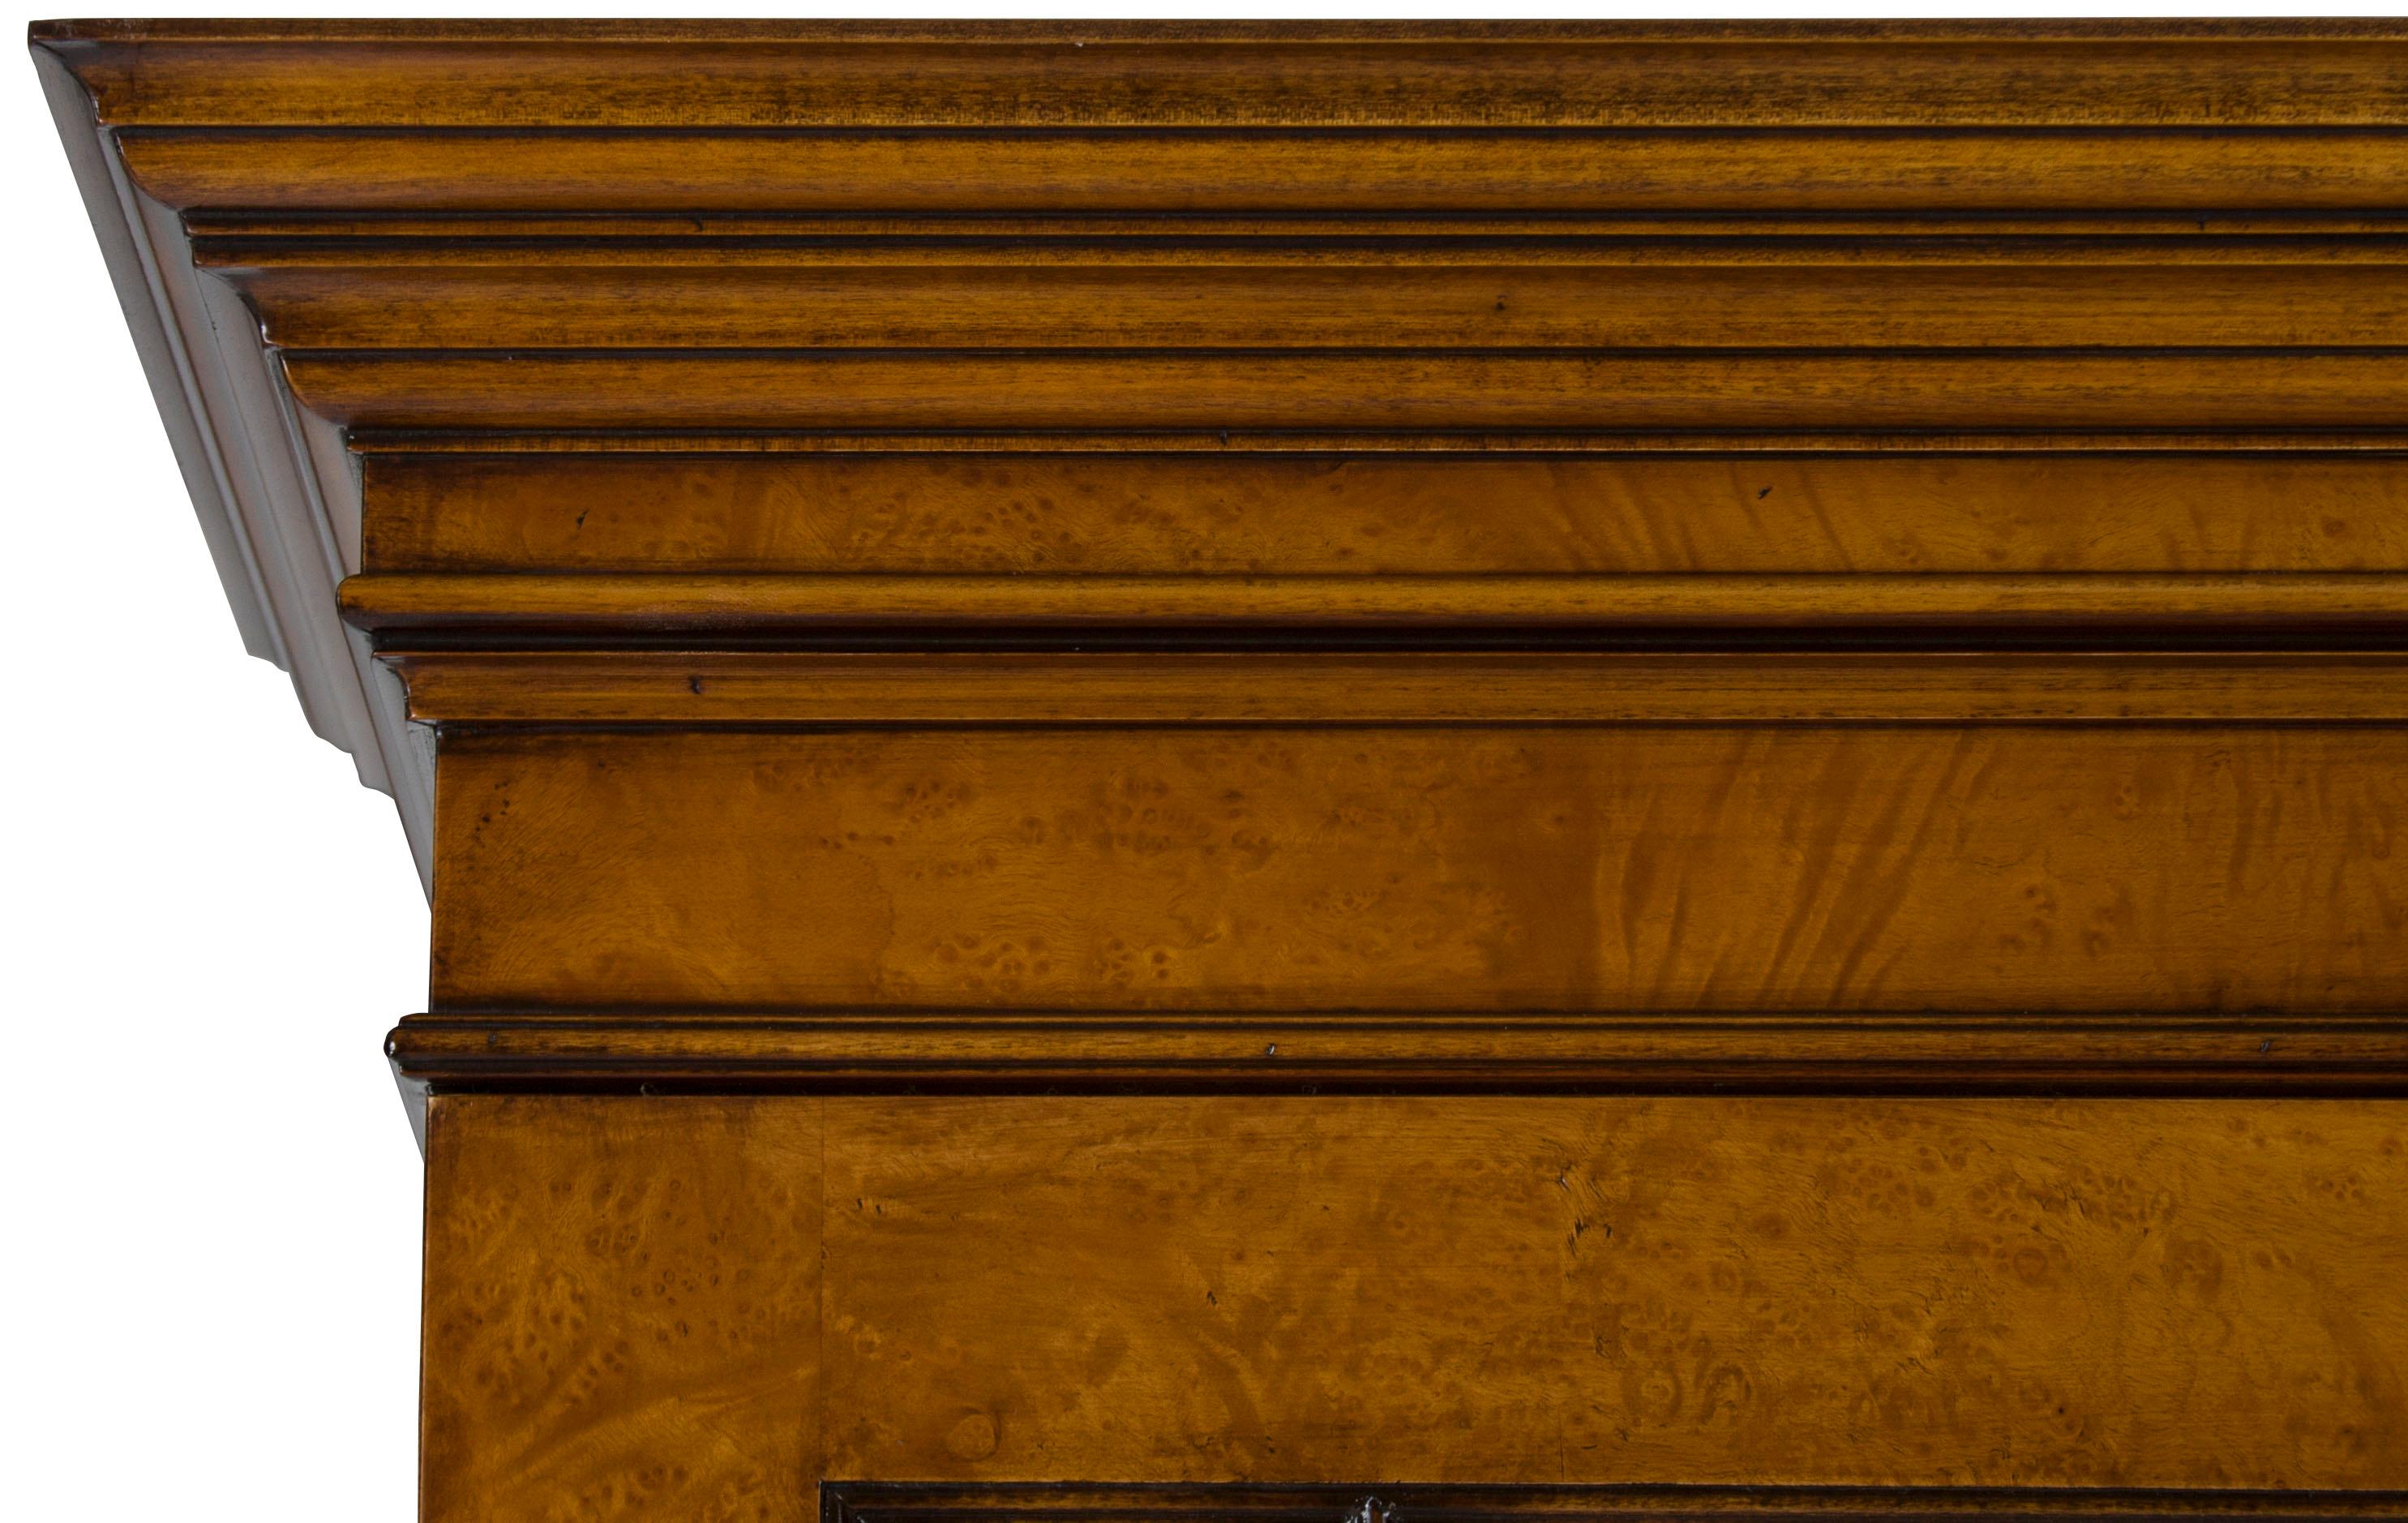 This antique style walnut bookcase was recently handmade in England by a third-generation cabinetmaker. From the production process to the materials used, every aspect of this bookcase is of the utmost quality. The burl walnut, for instance, having